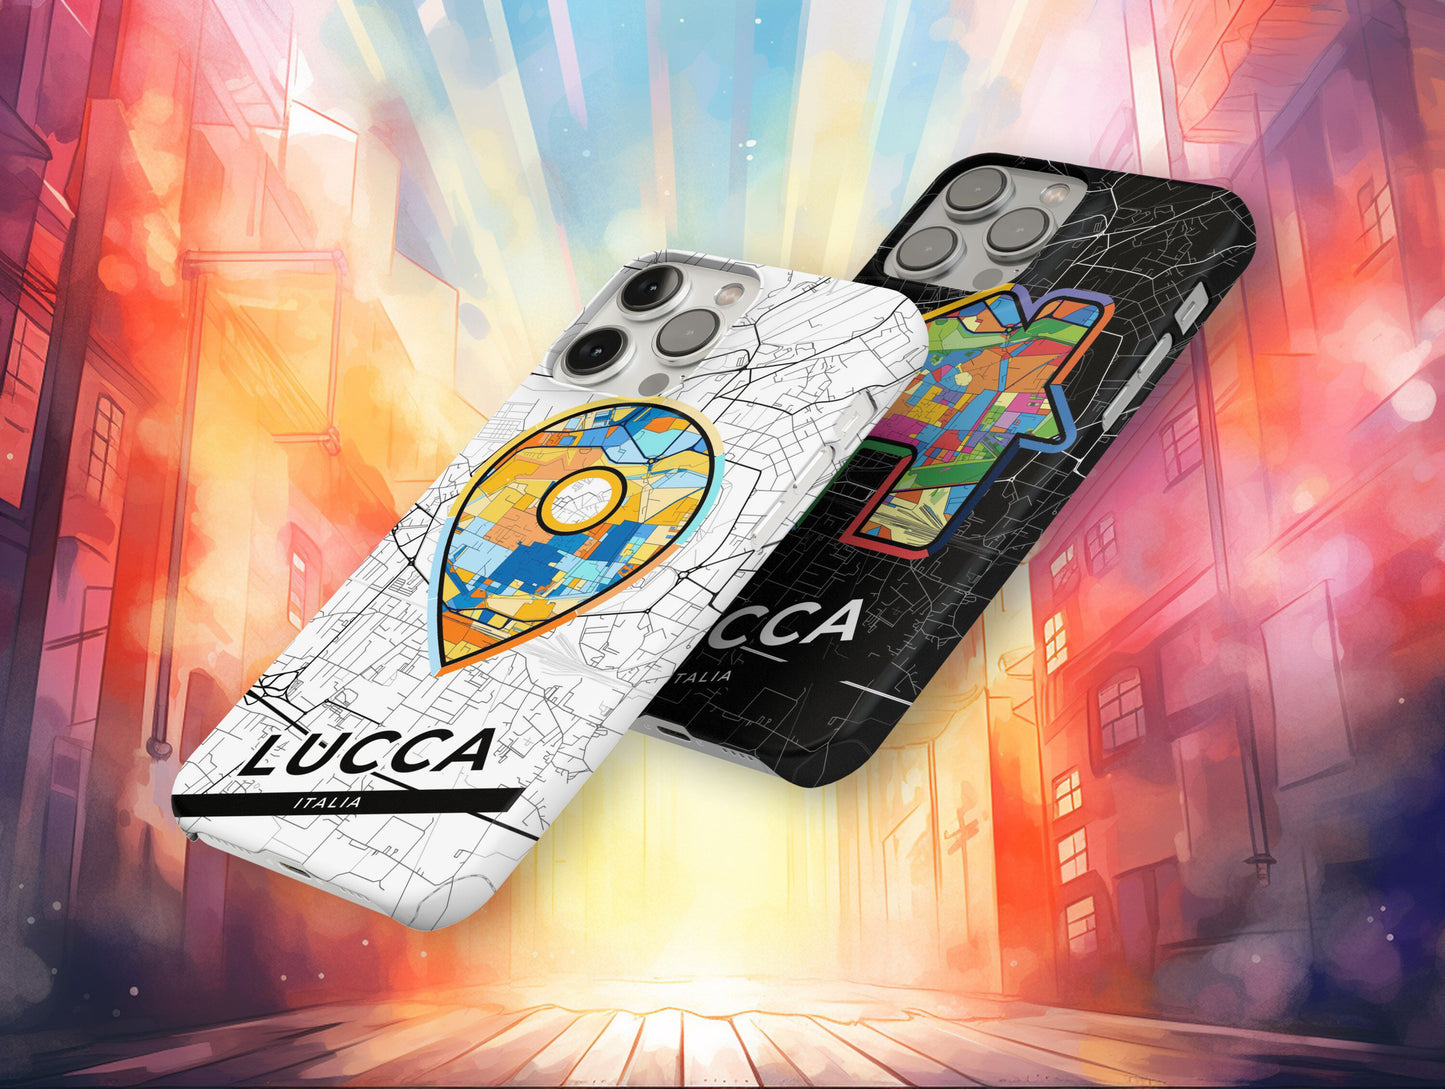 Lucca Italy slim phone case with colorful icon. Birthday, wedding or housewarming gift. Couple match cases.